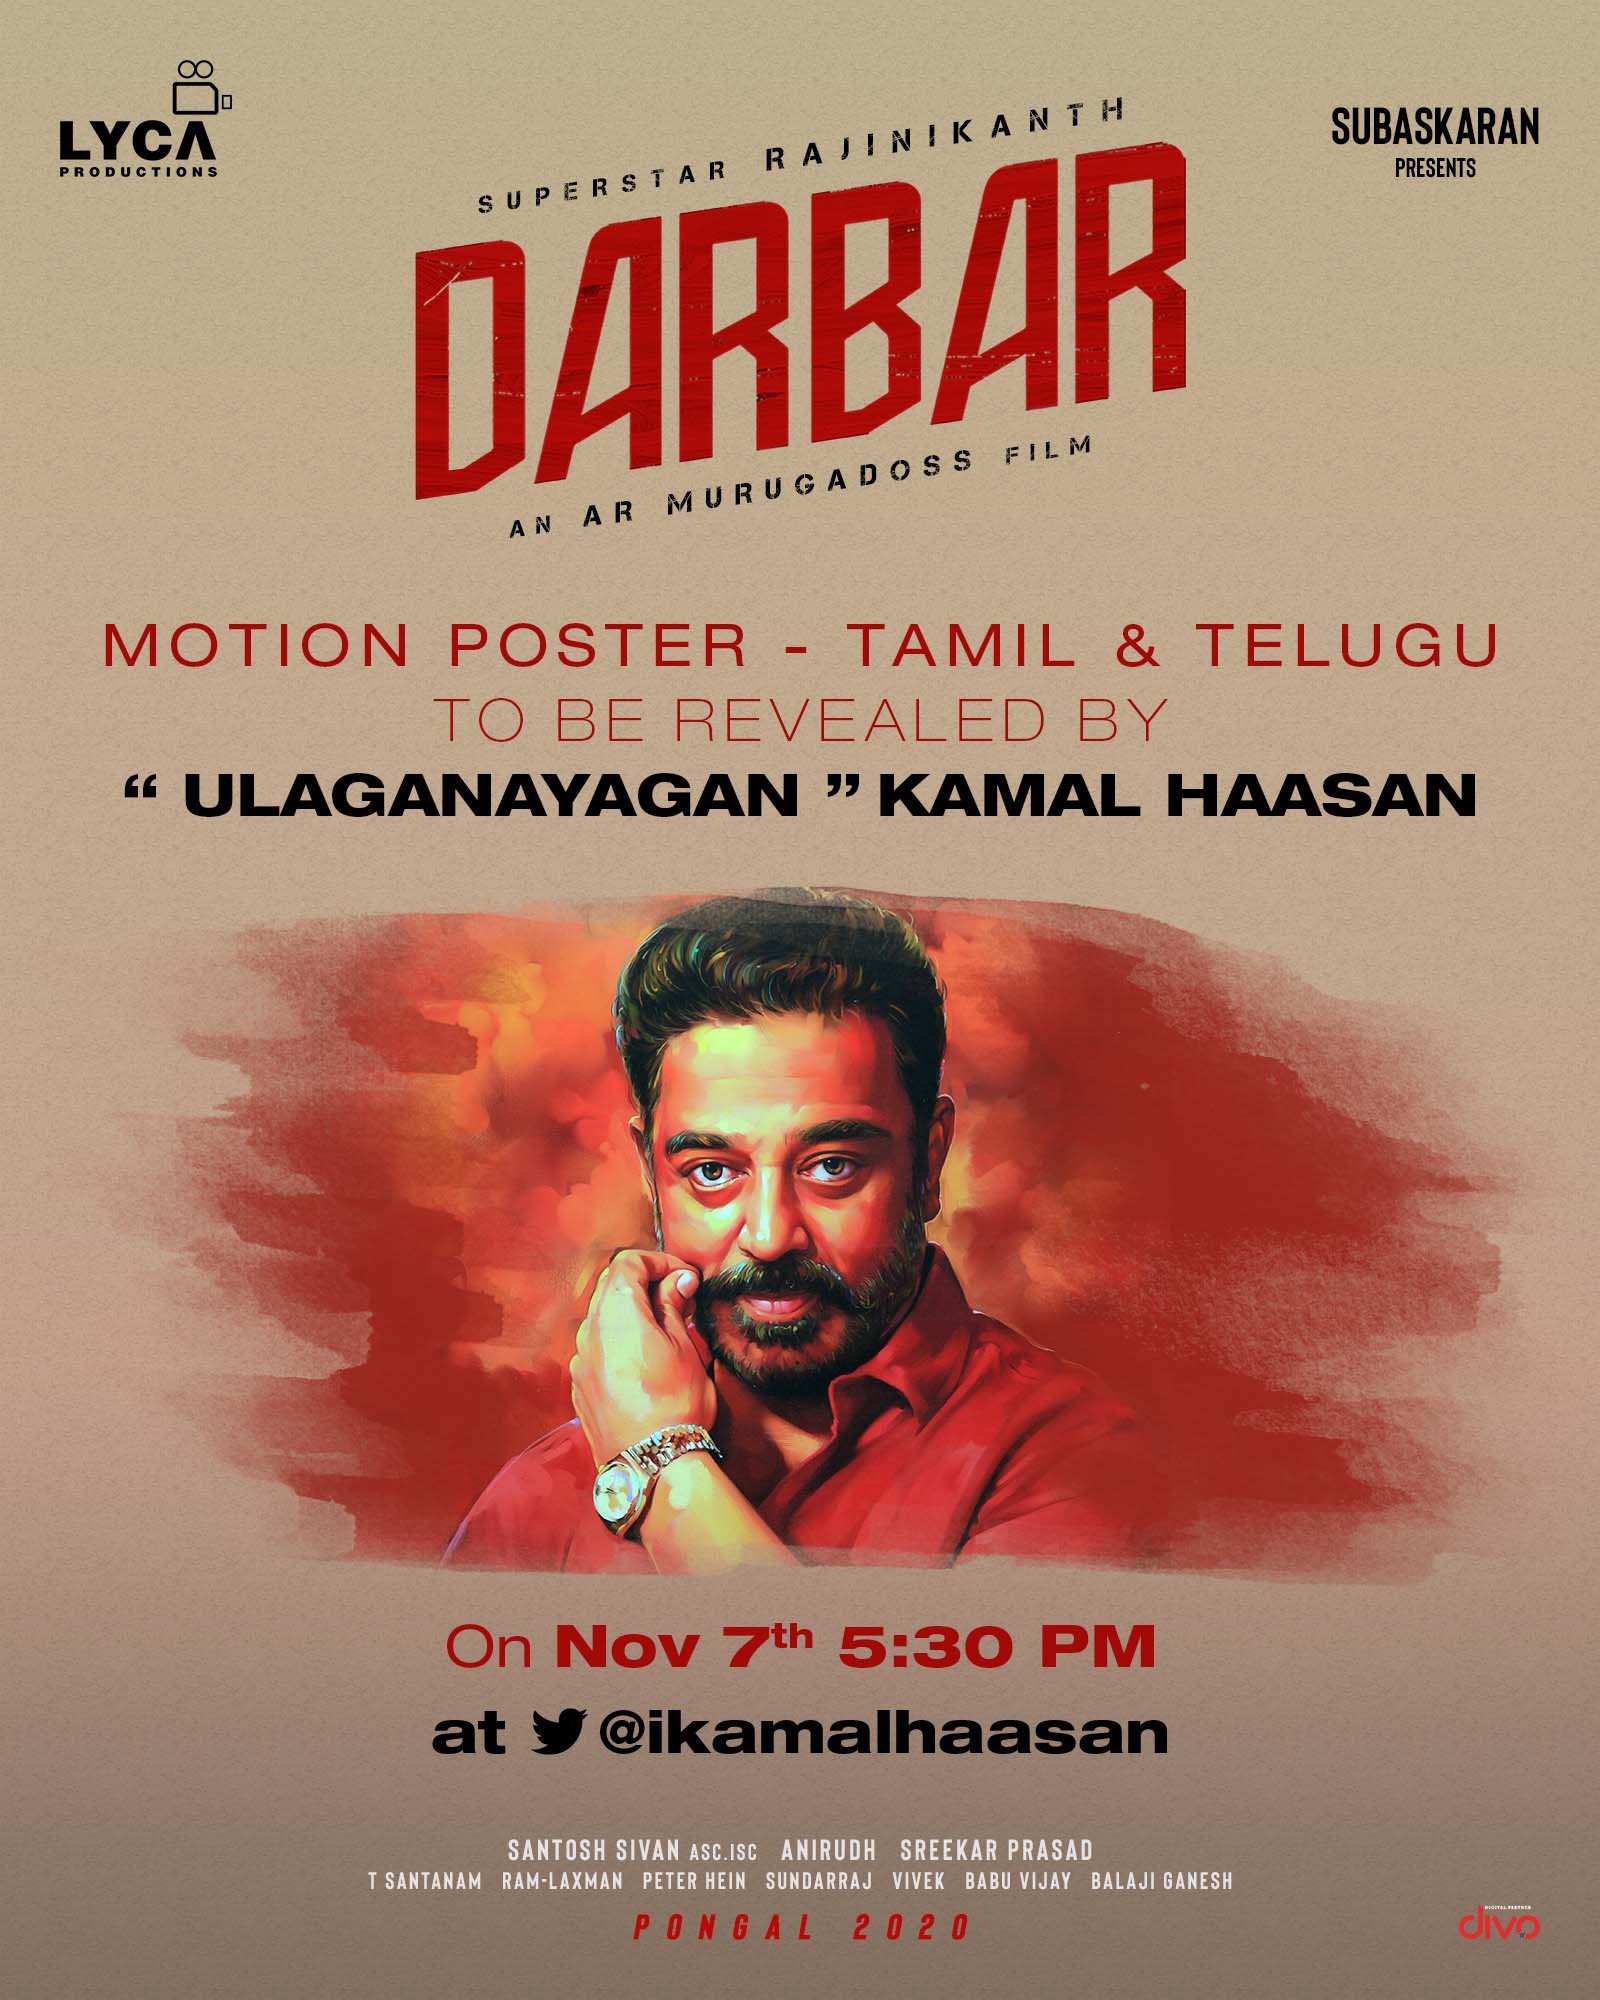 Darbar Motion Poster will be released by Kamalahassan, Mohanlal and Salman Khan